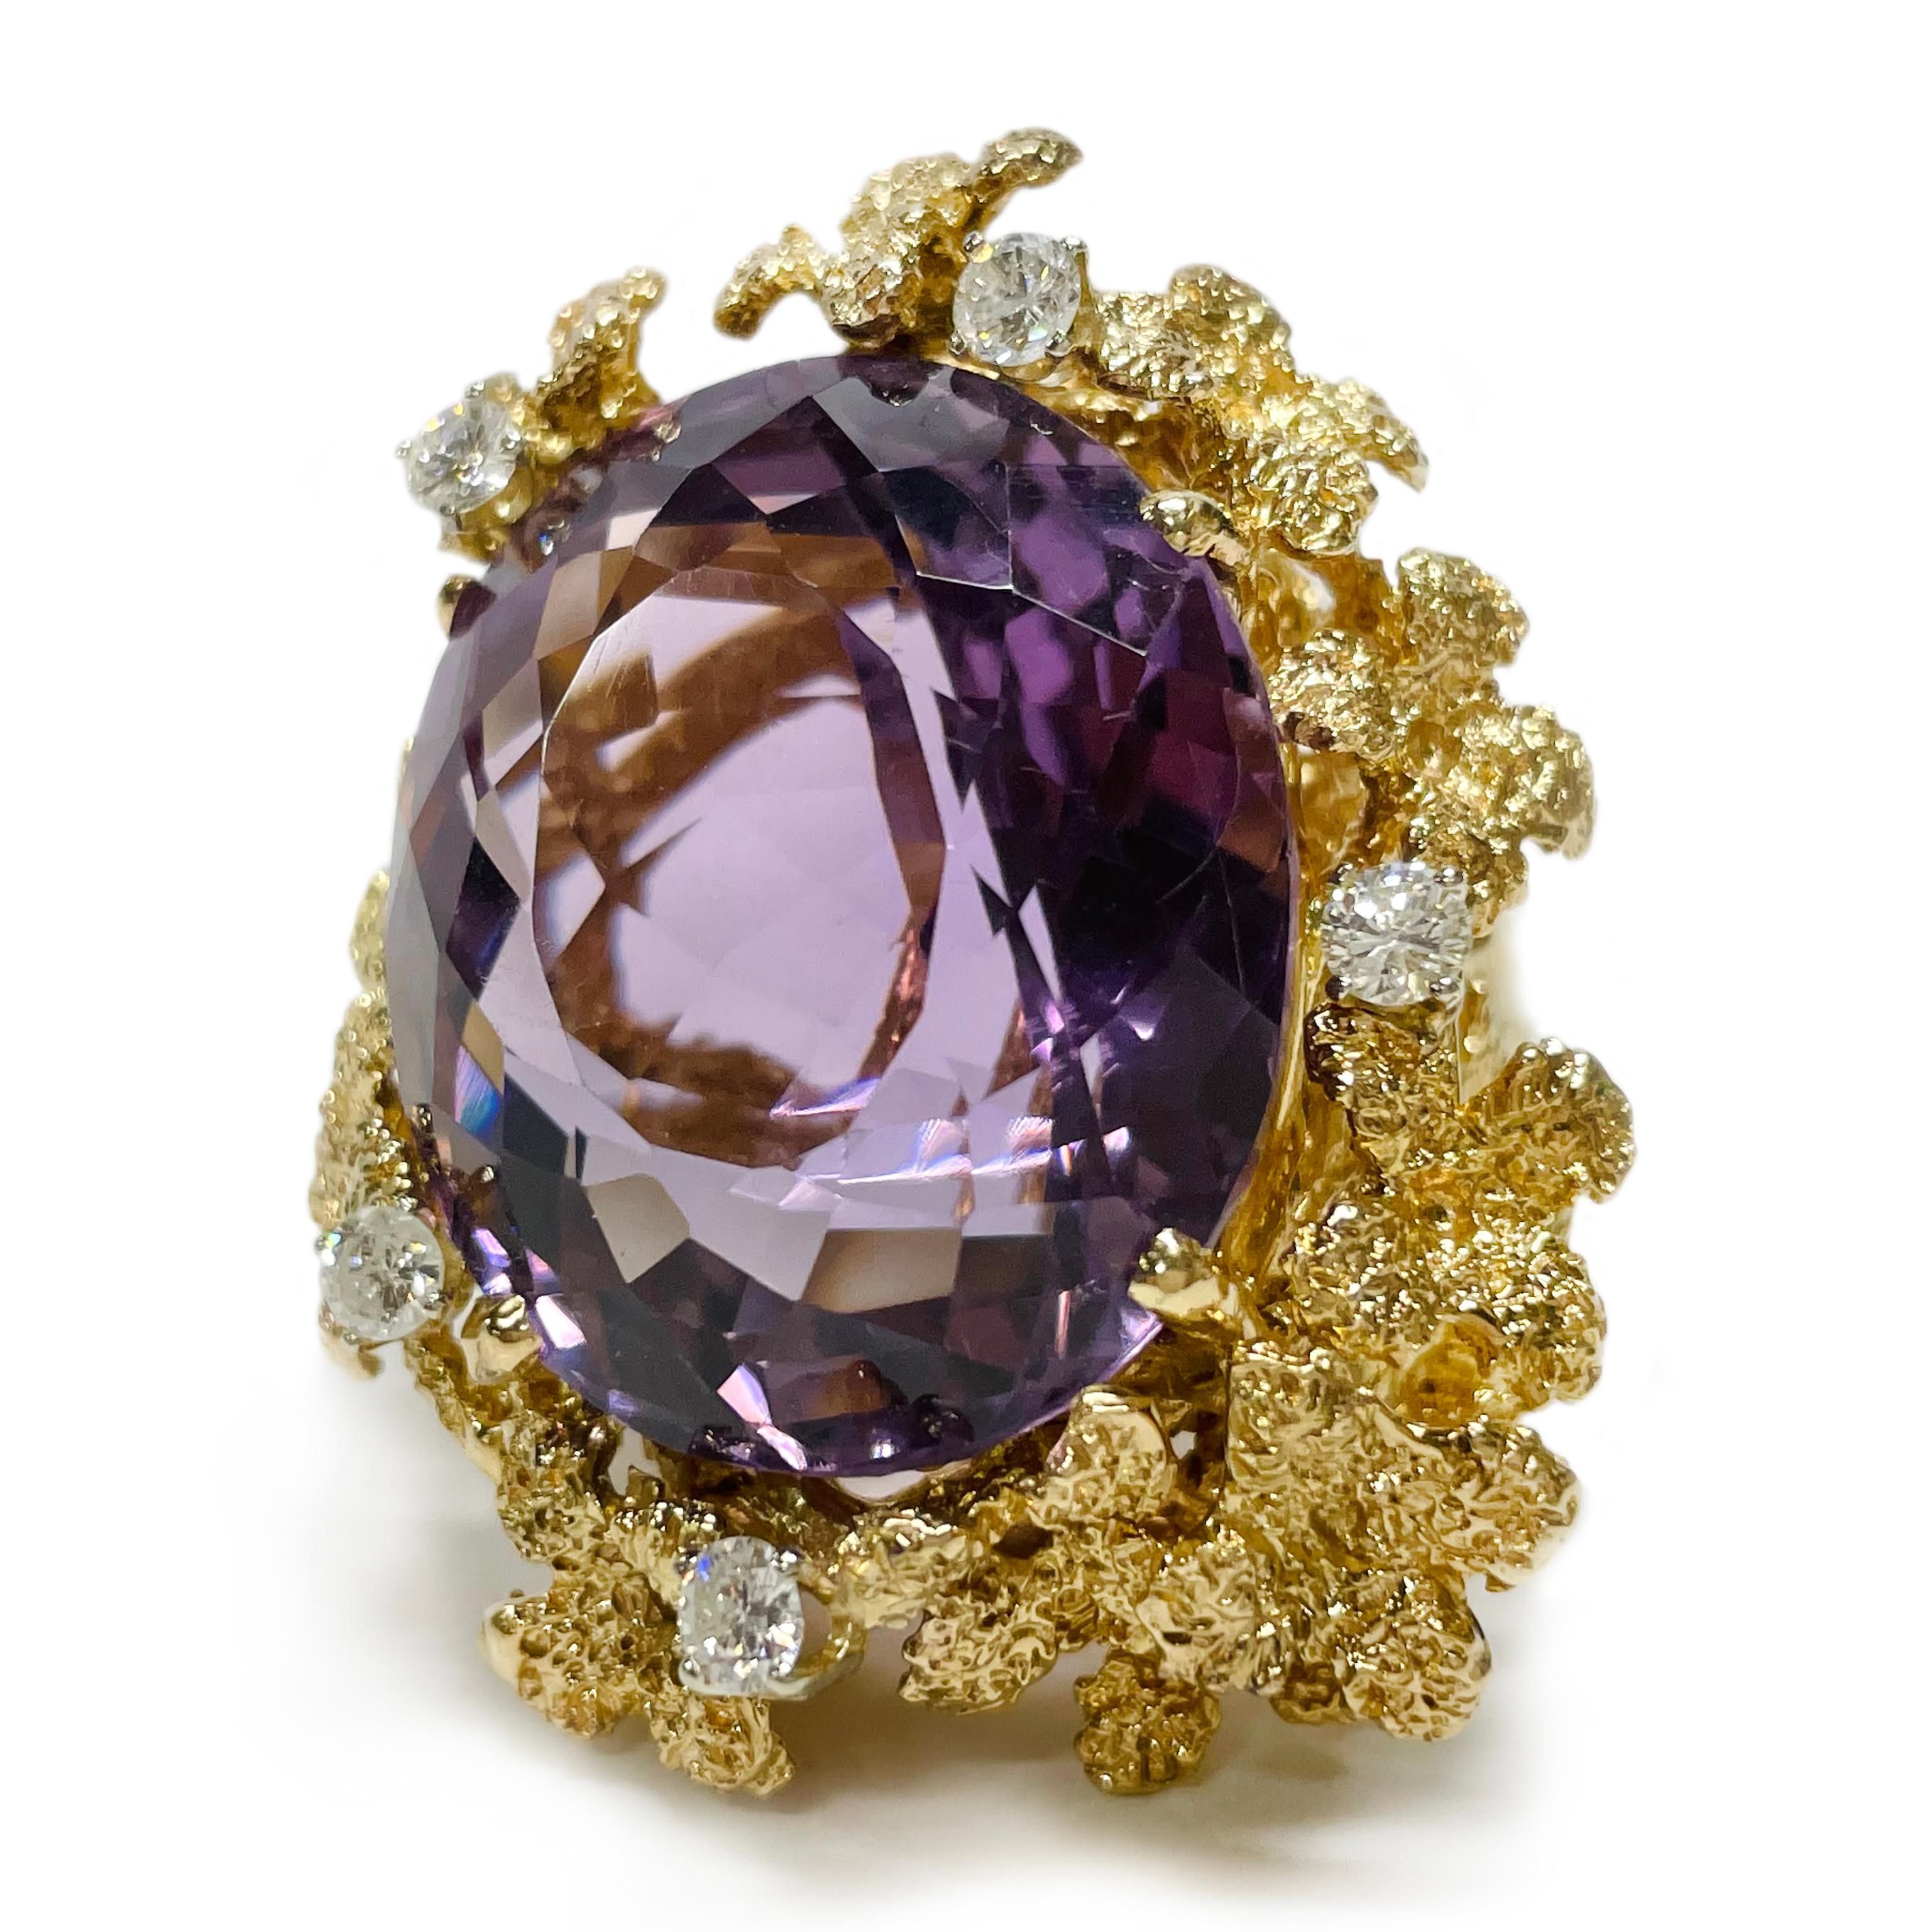 18 Karat Yellow Gold Amethyst Diamond Cocktail Ring. The ring features a large 27.7 x 23.3mm oval-cut Amethyst, five round 3.4mm prong-set diamonds and multiple textured gold flowers. The diamonds have a total carat weight of 0.75ctw. This is a true